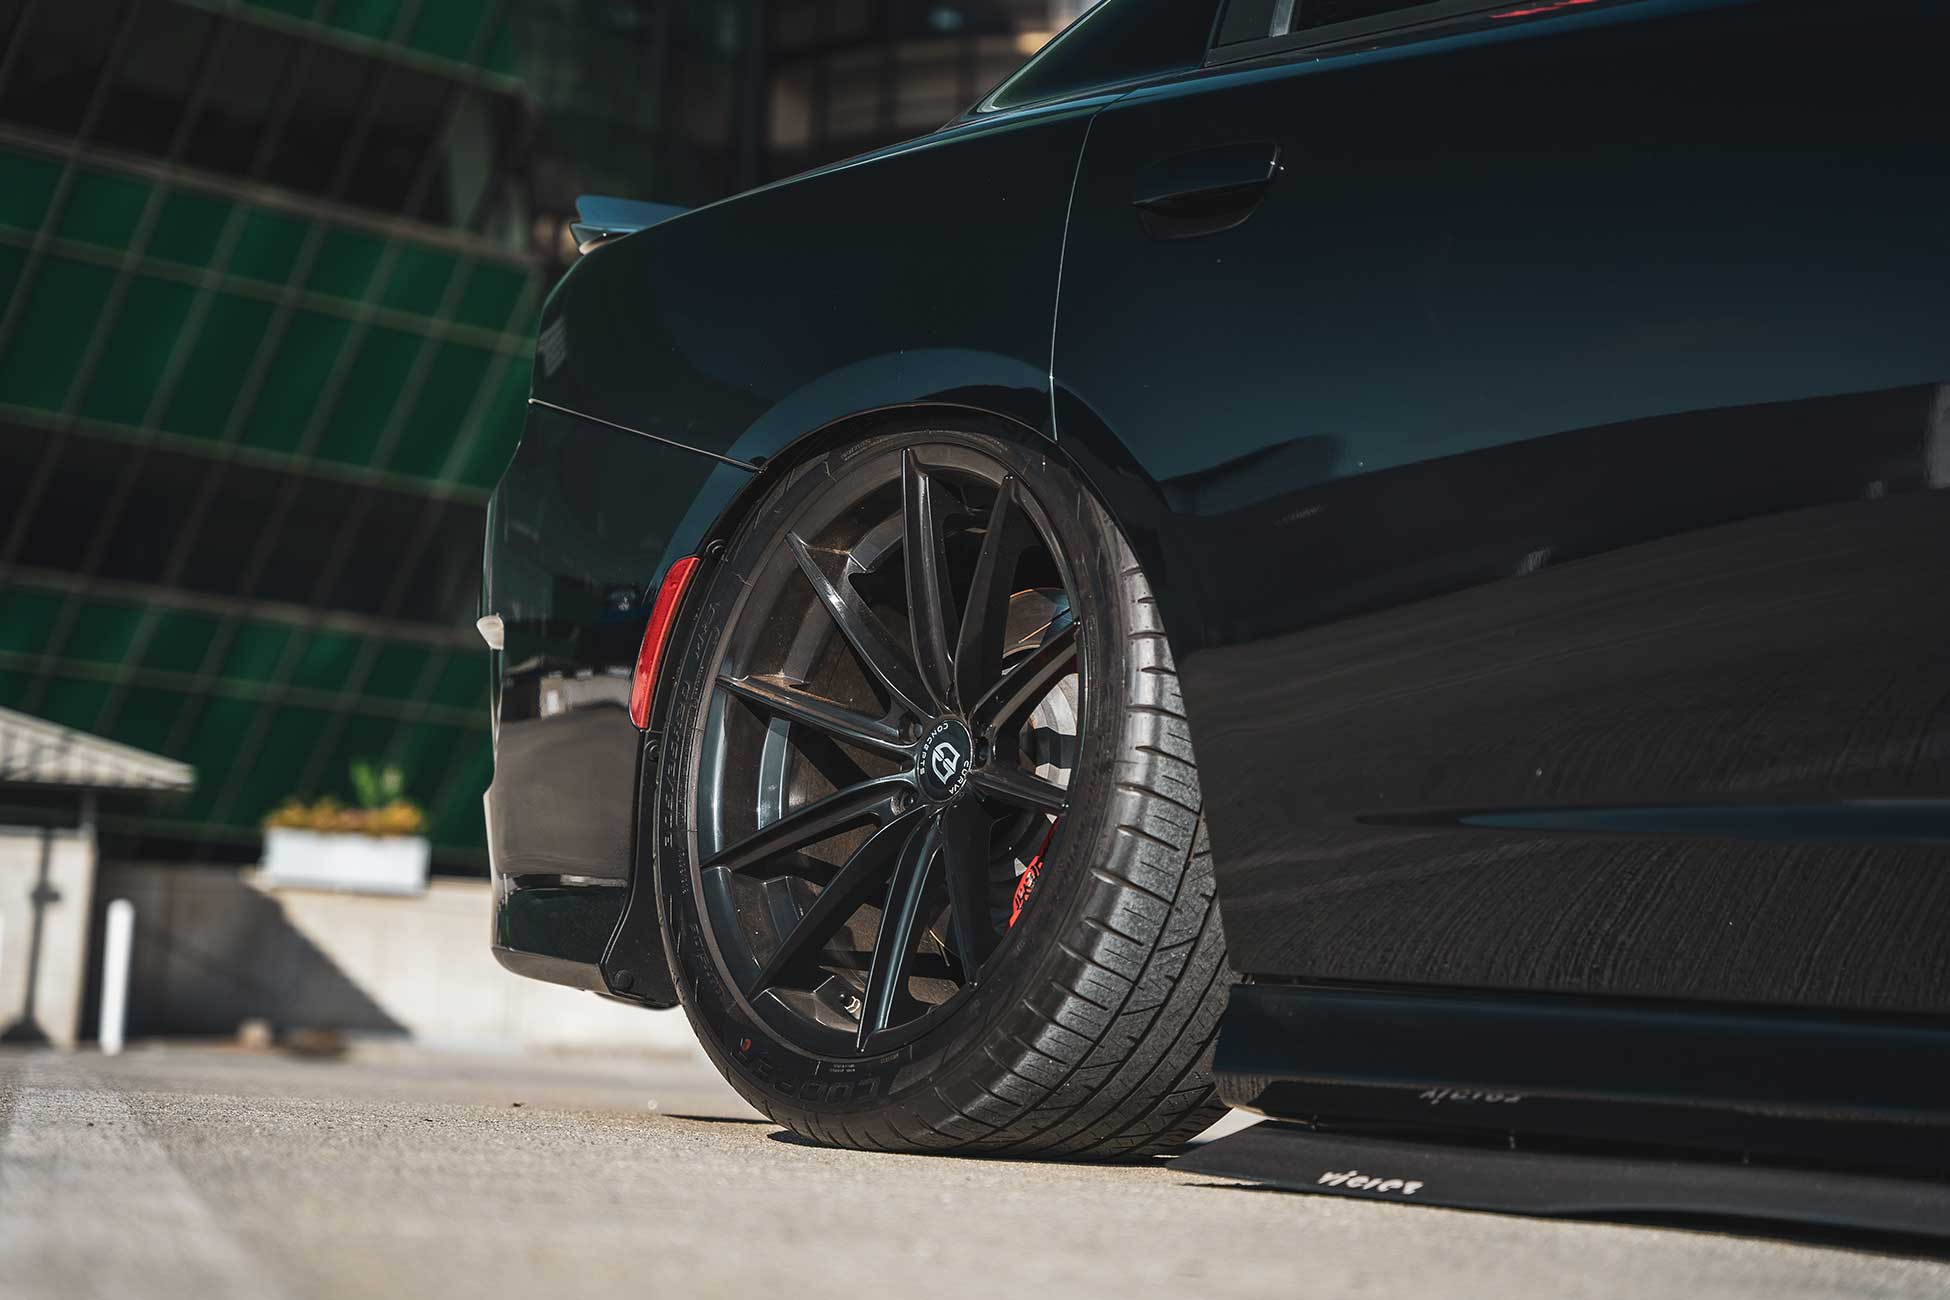 Bagged Dodge Charger on Staggered 20" Wheels